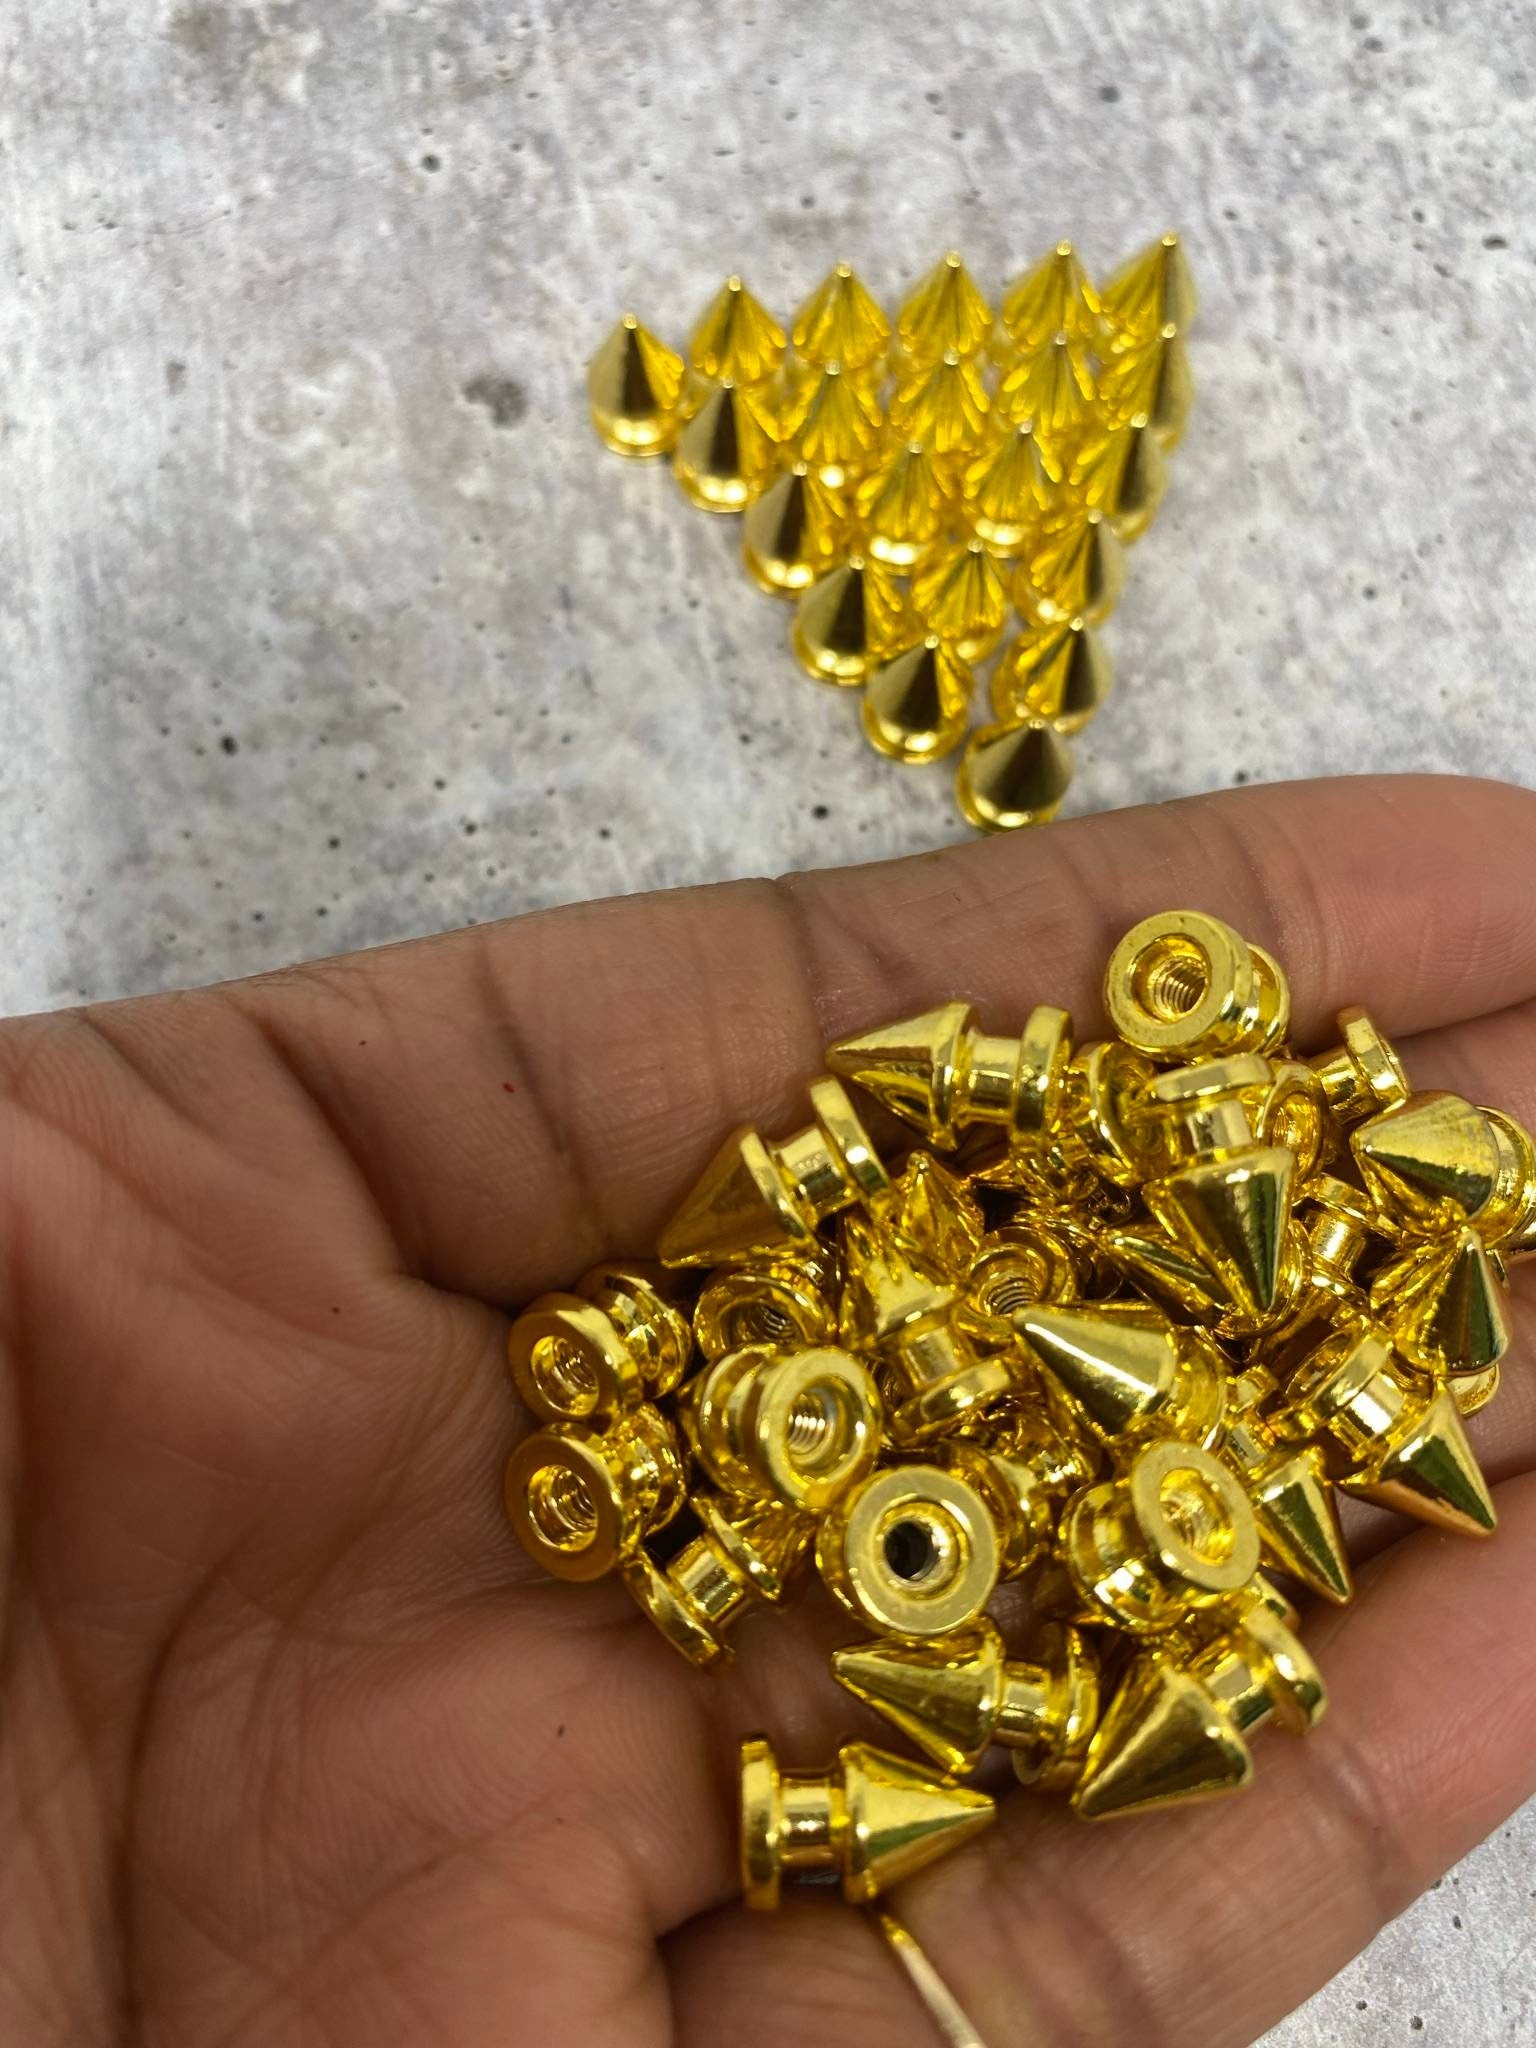 New,"Gold" Spikes, 12mm, 100-pcs, Spikes w/Screws, Small Cone Spikes & Studs, Metallic Screw-Back for DIY Punk, Leather, Bags, and Apparel